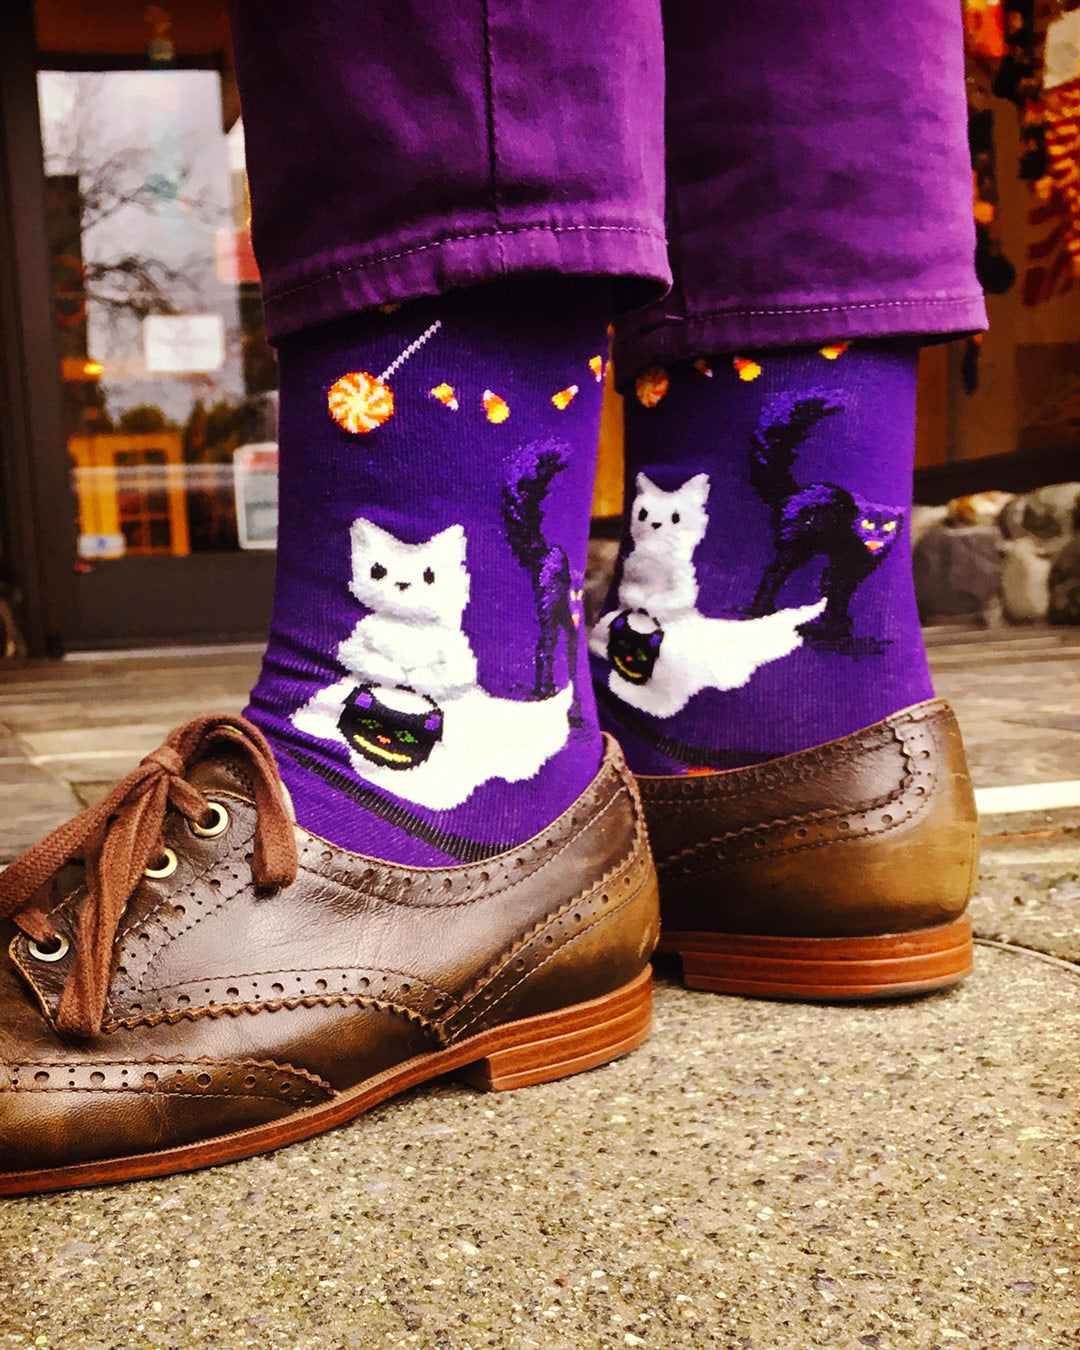 Cute cat Halloween socks show trick-or-treating cats dressed in ghost costumes